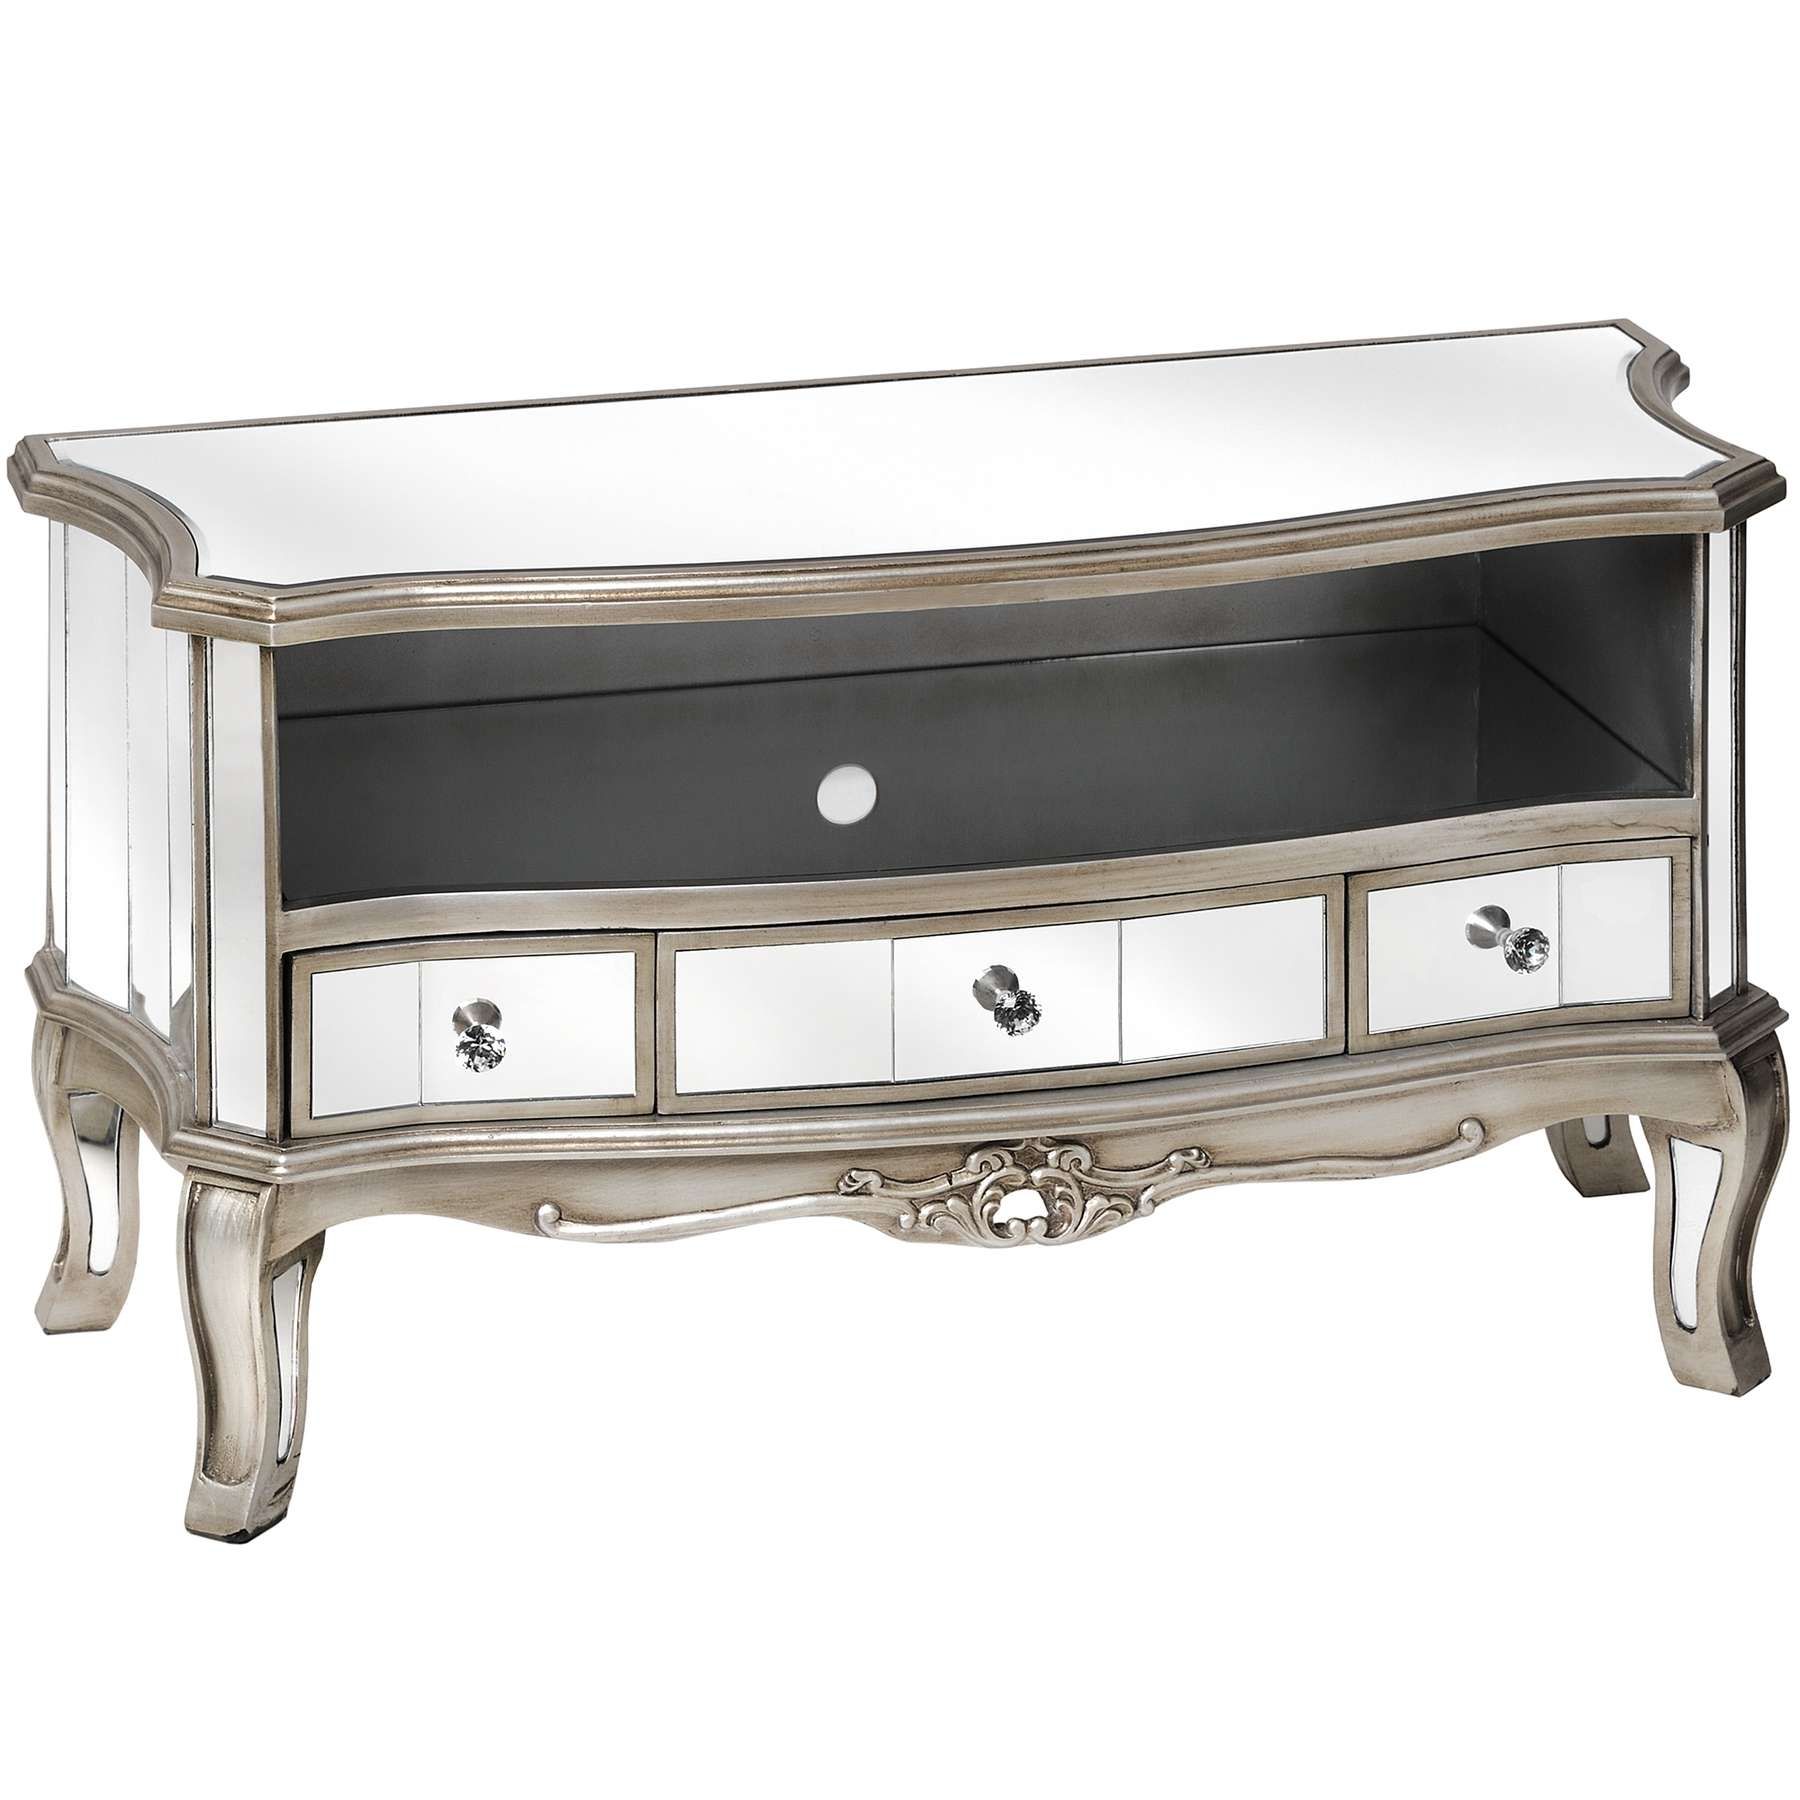 Argente Mirrored Television Cabinet | From Baytree Interiors With Mirrored Tv Cabinets (View 11 of 20)